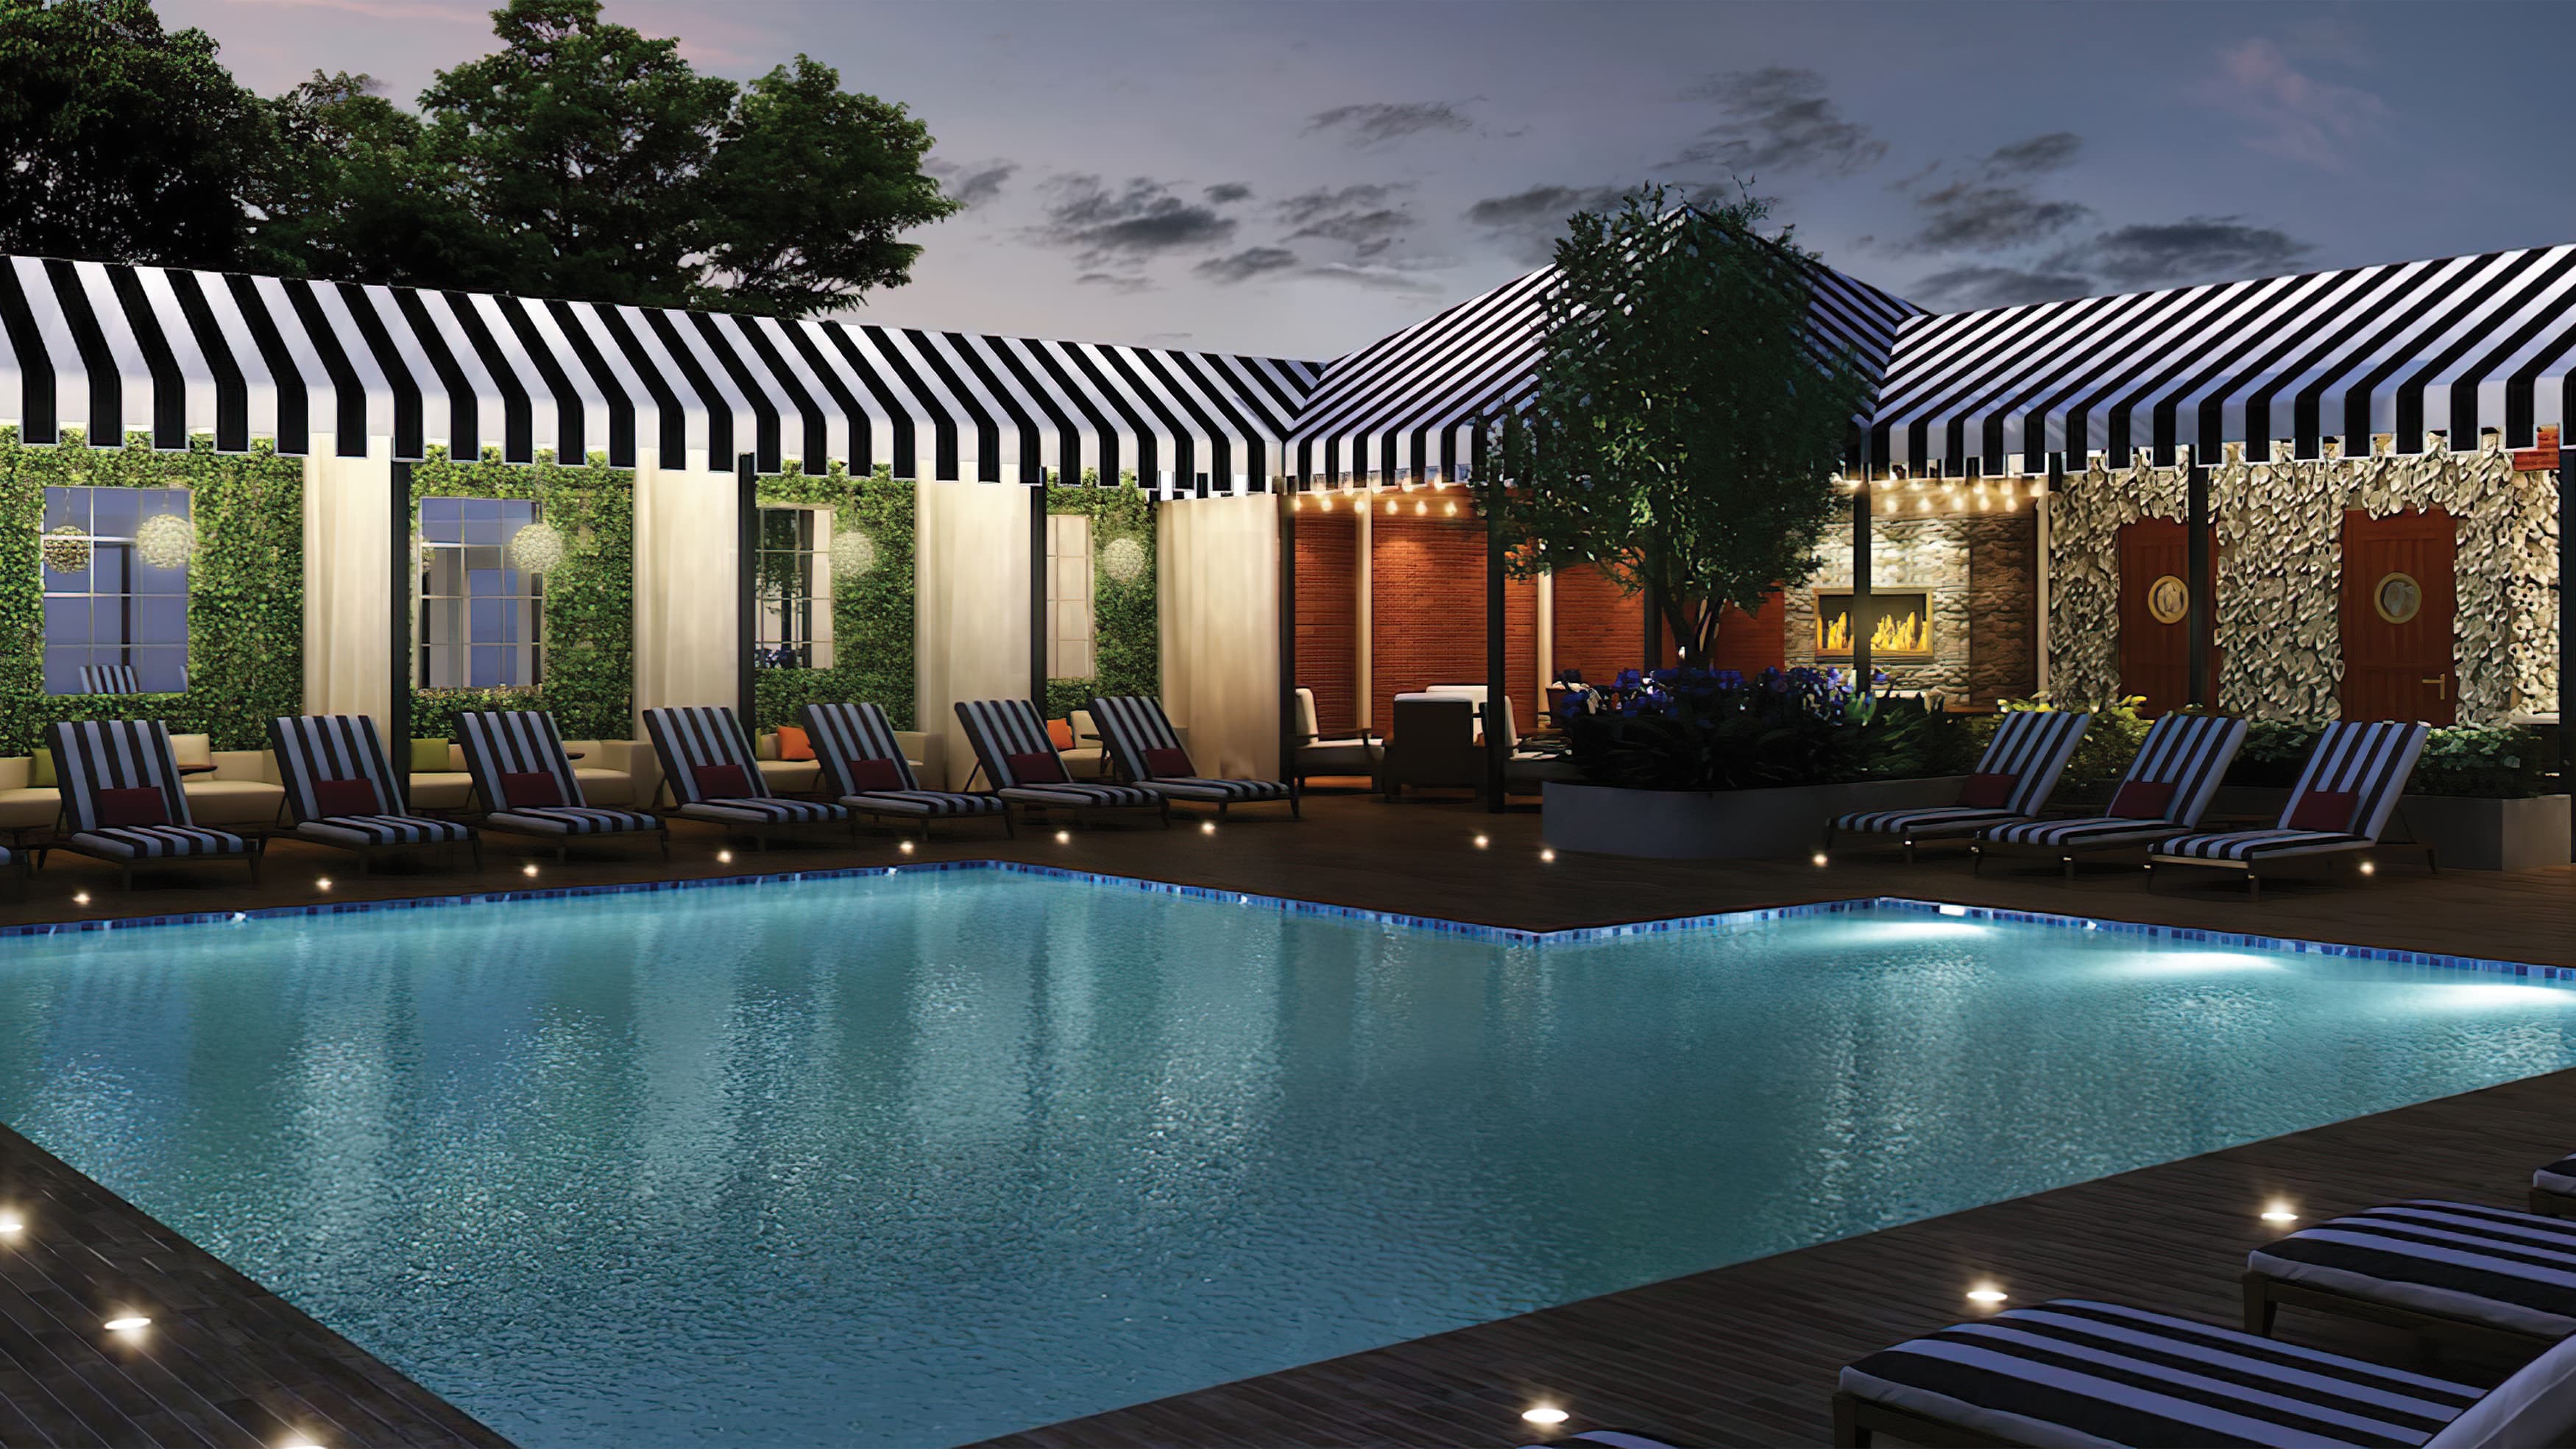 A rendering of a pool area at the Hotel ZaZa in Houston, Texas.